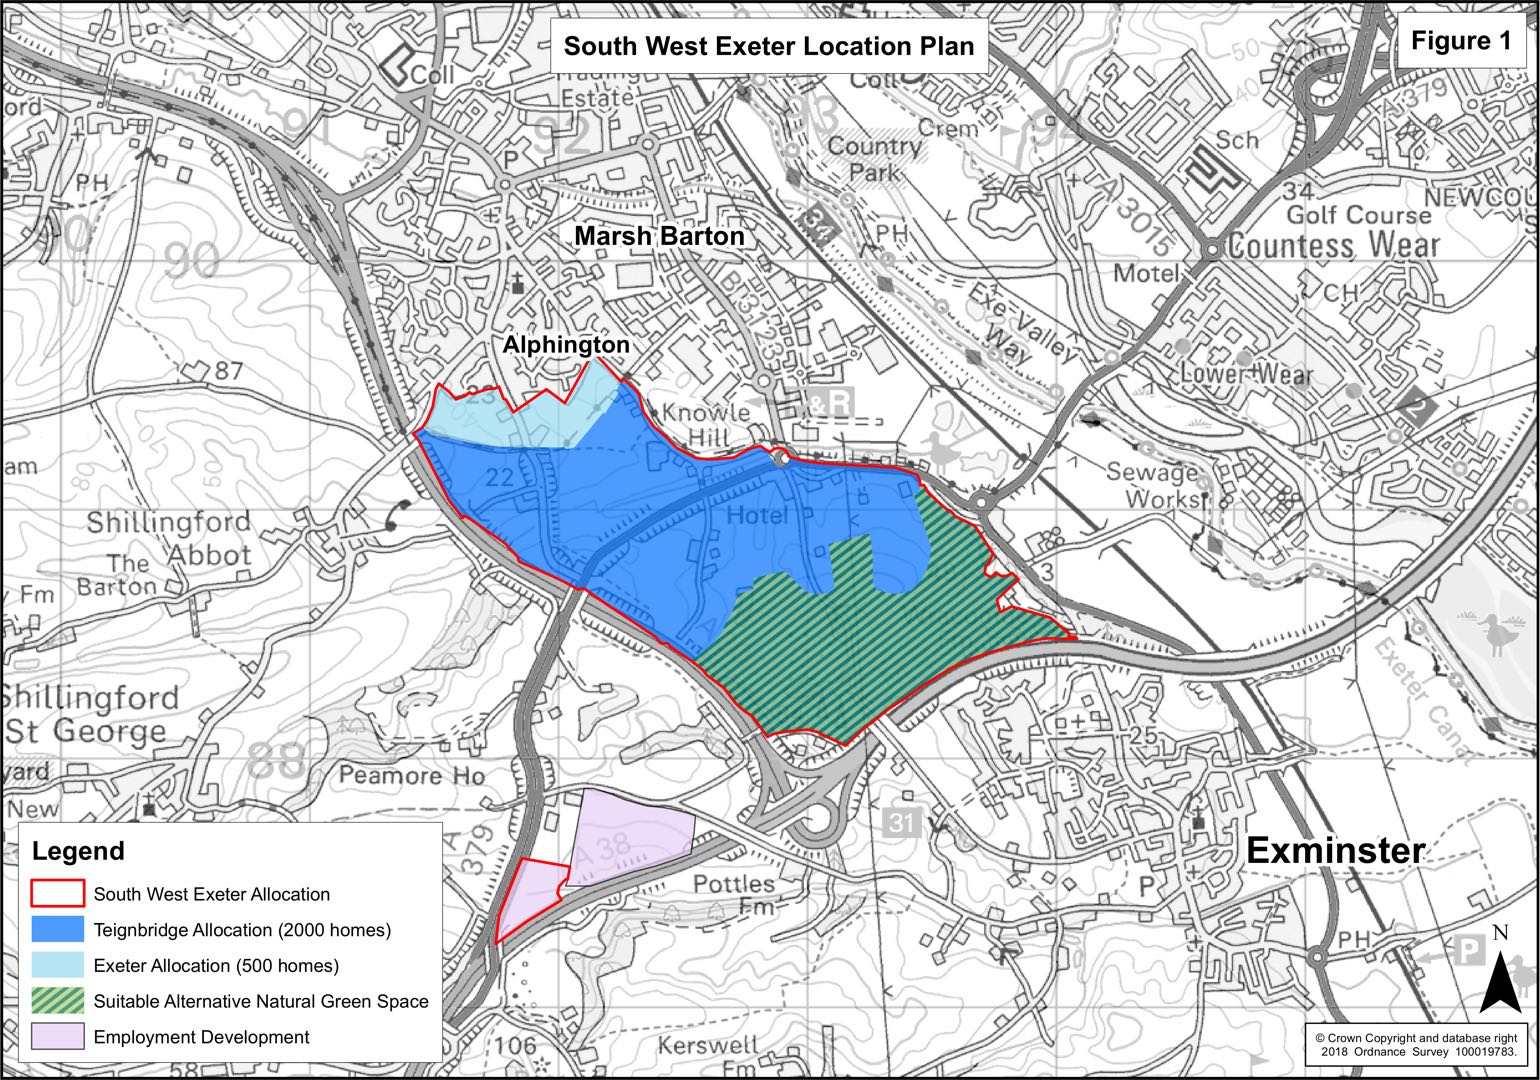 South West Exeter extension development plan